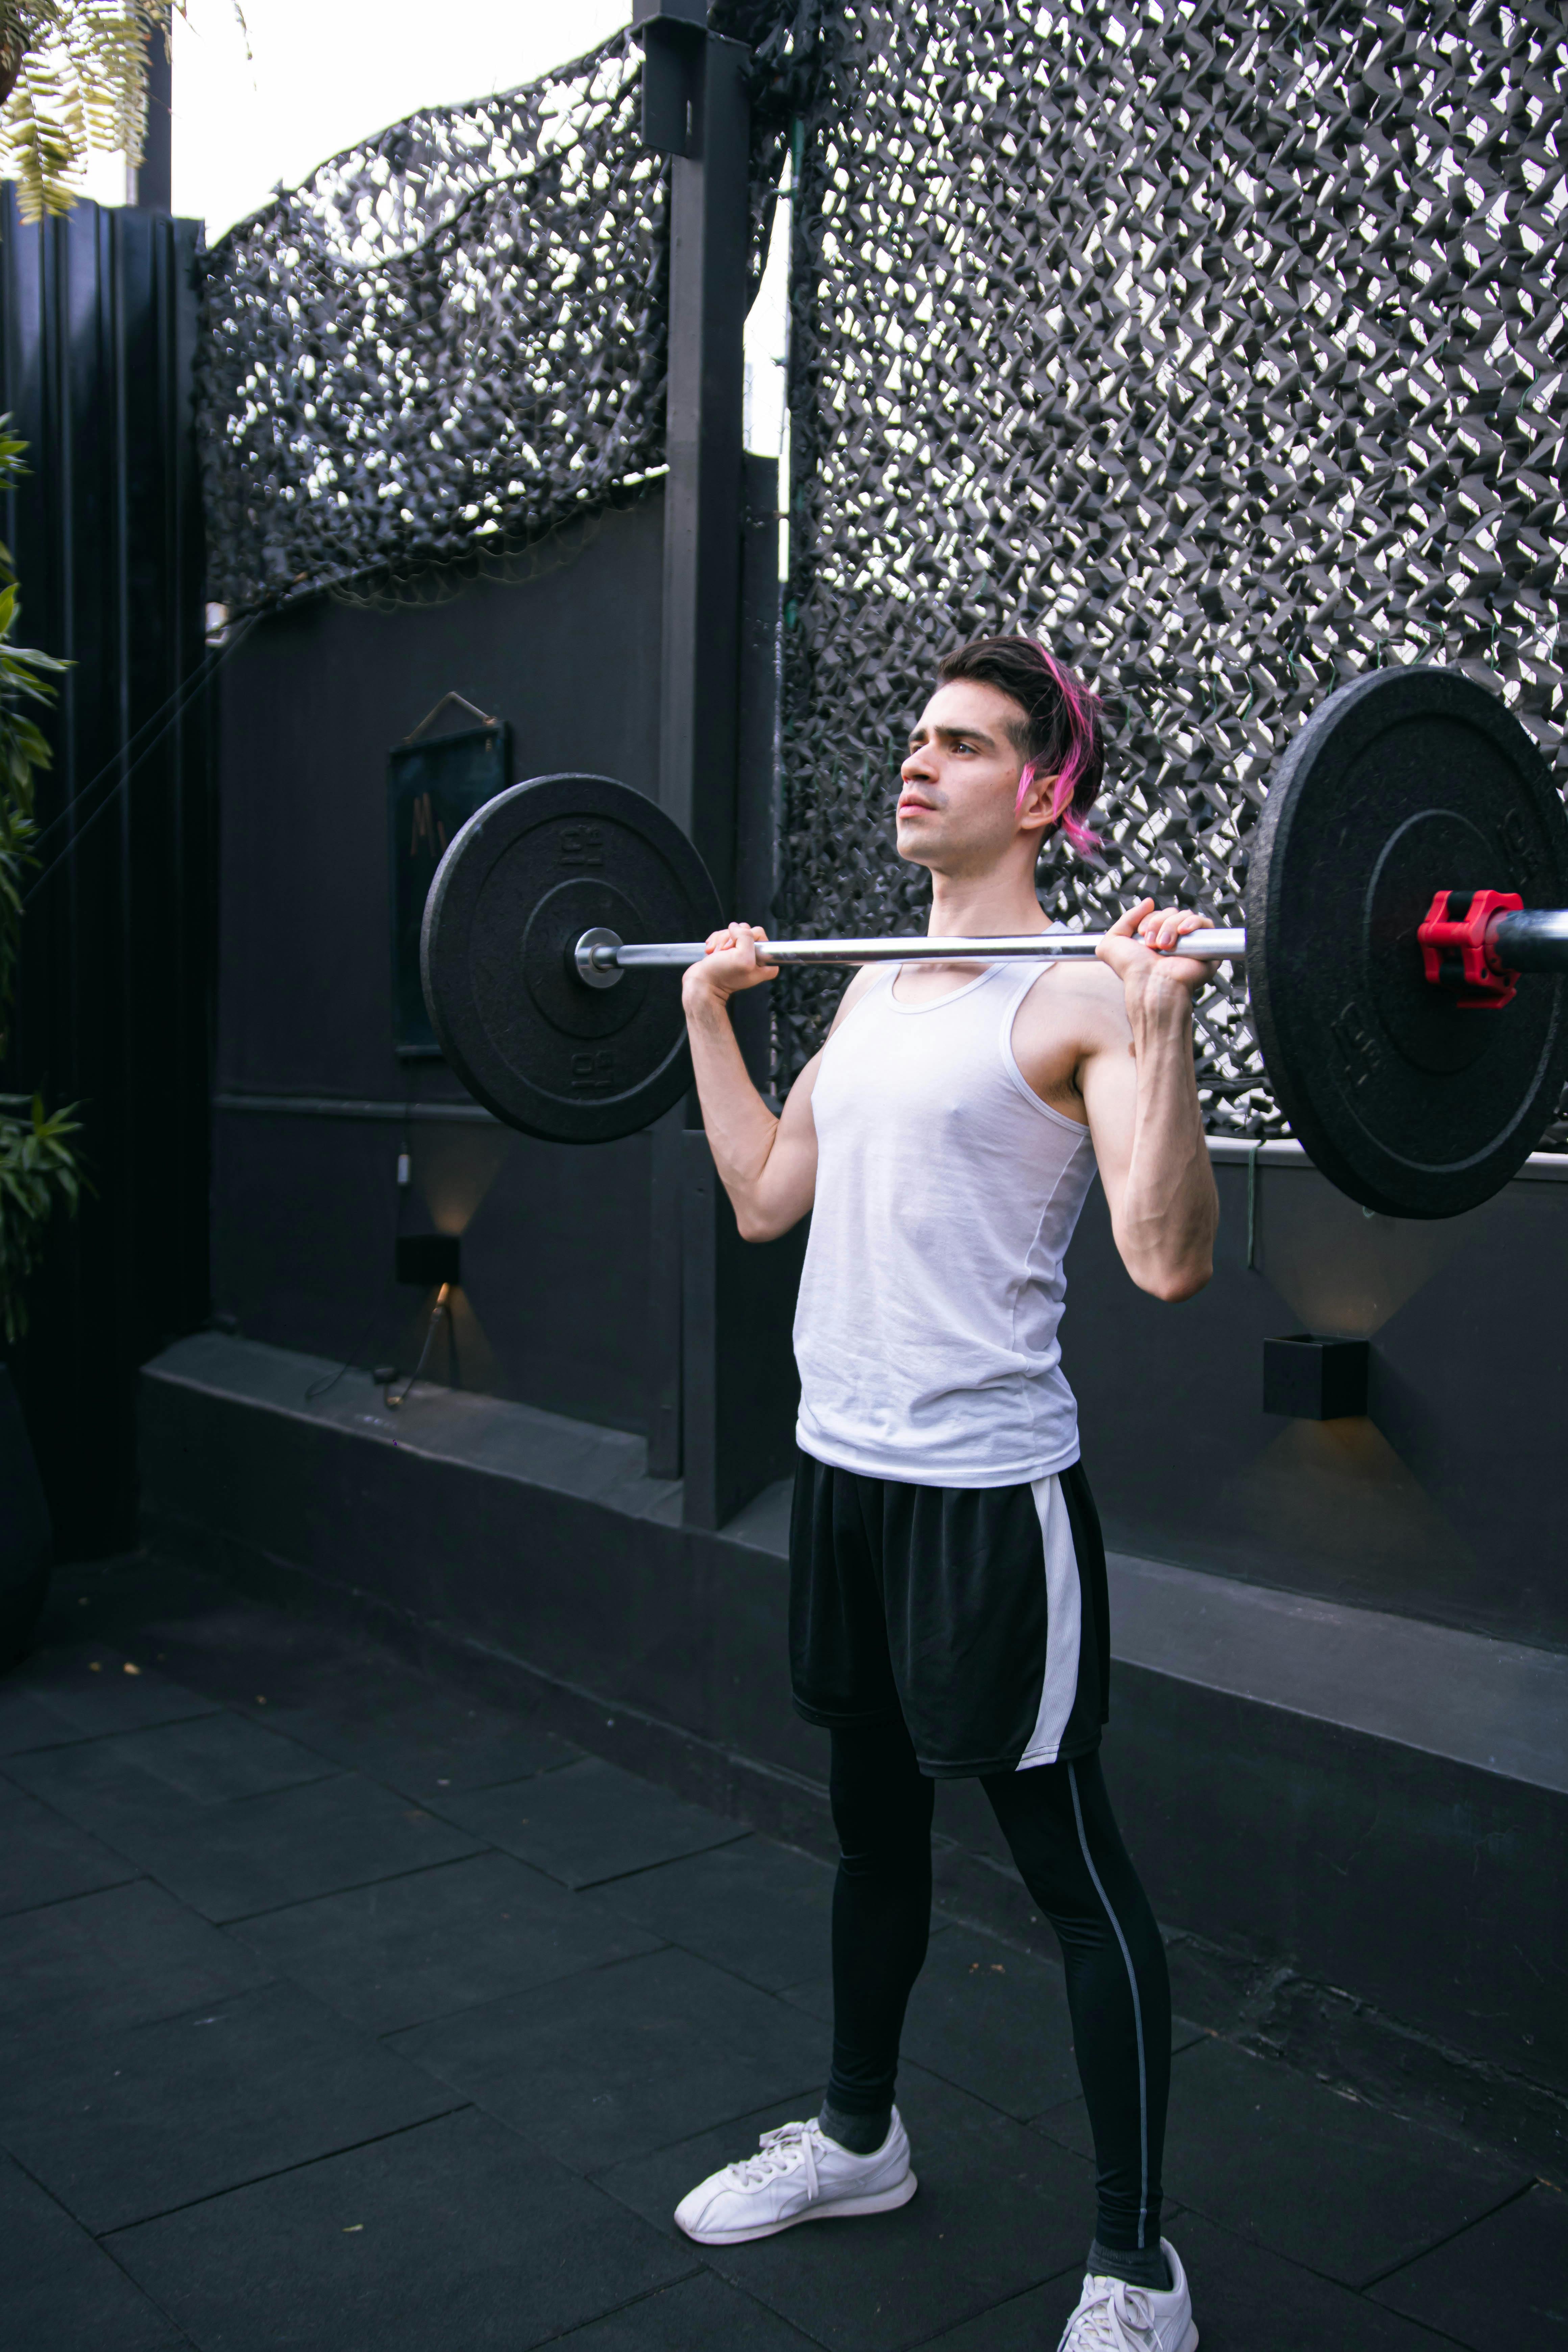 A Man Lifting Dumbbell while Wearing Virtual Goggles · Free Stock